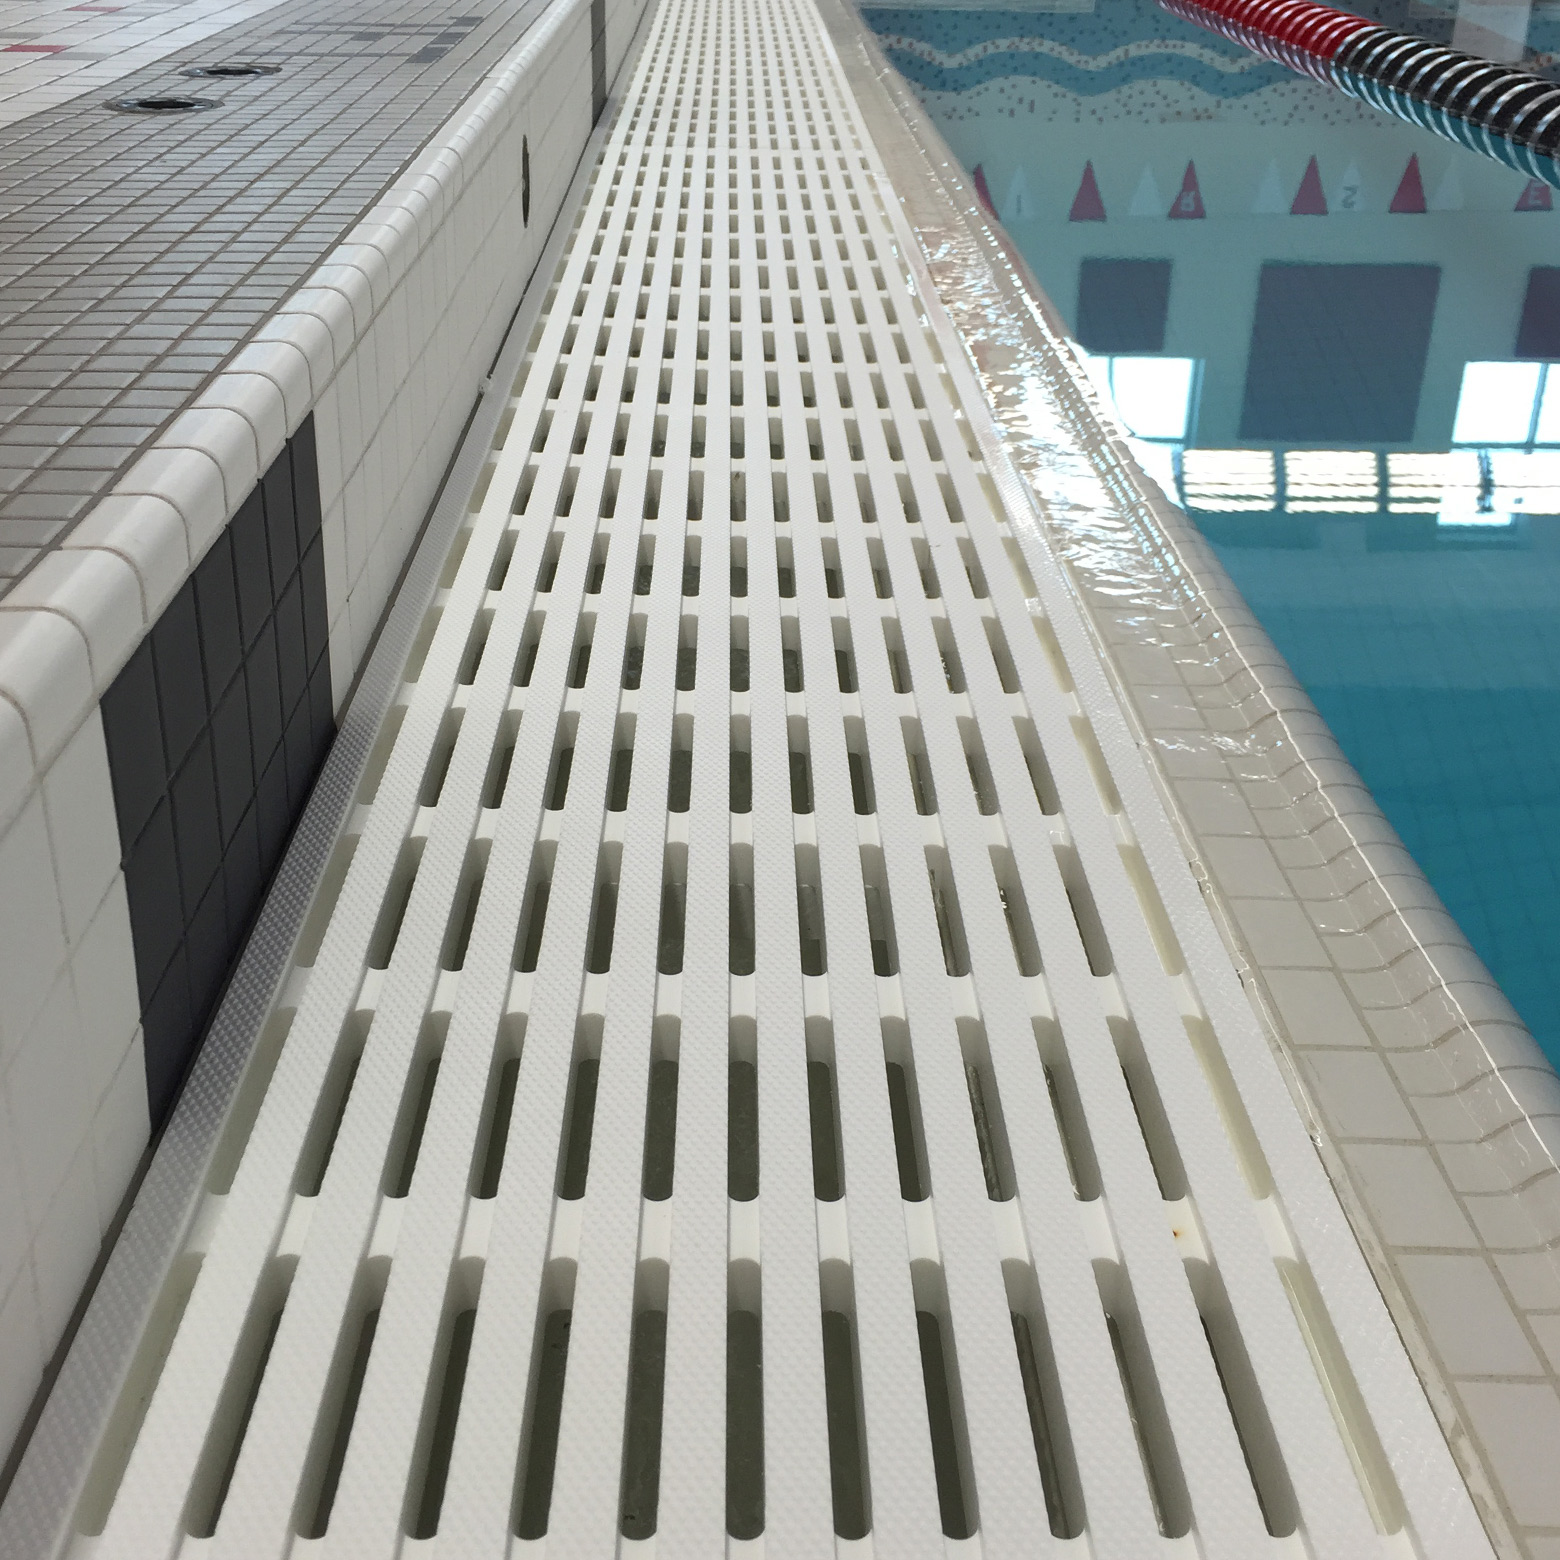 Strong swimming pool gutter grate.